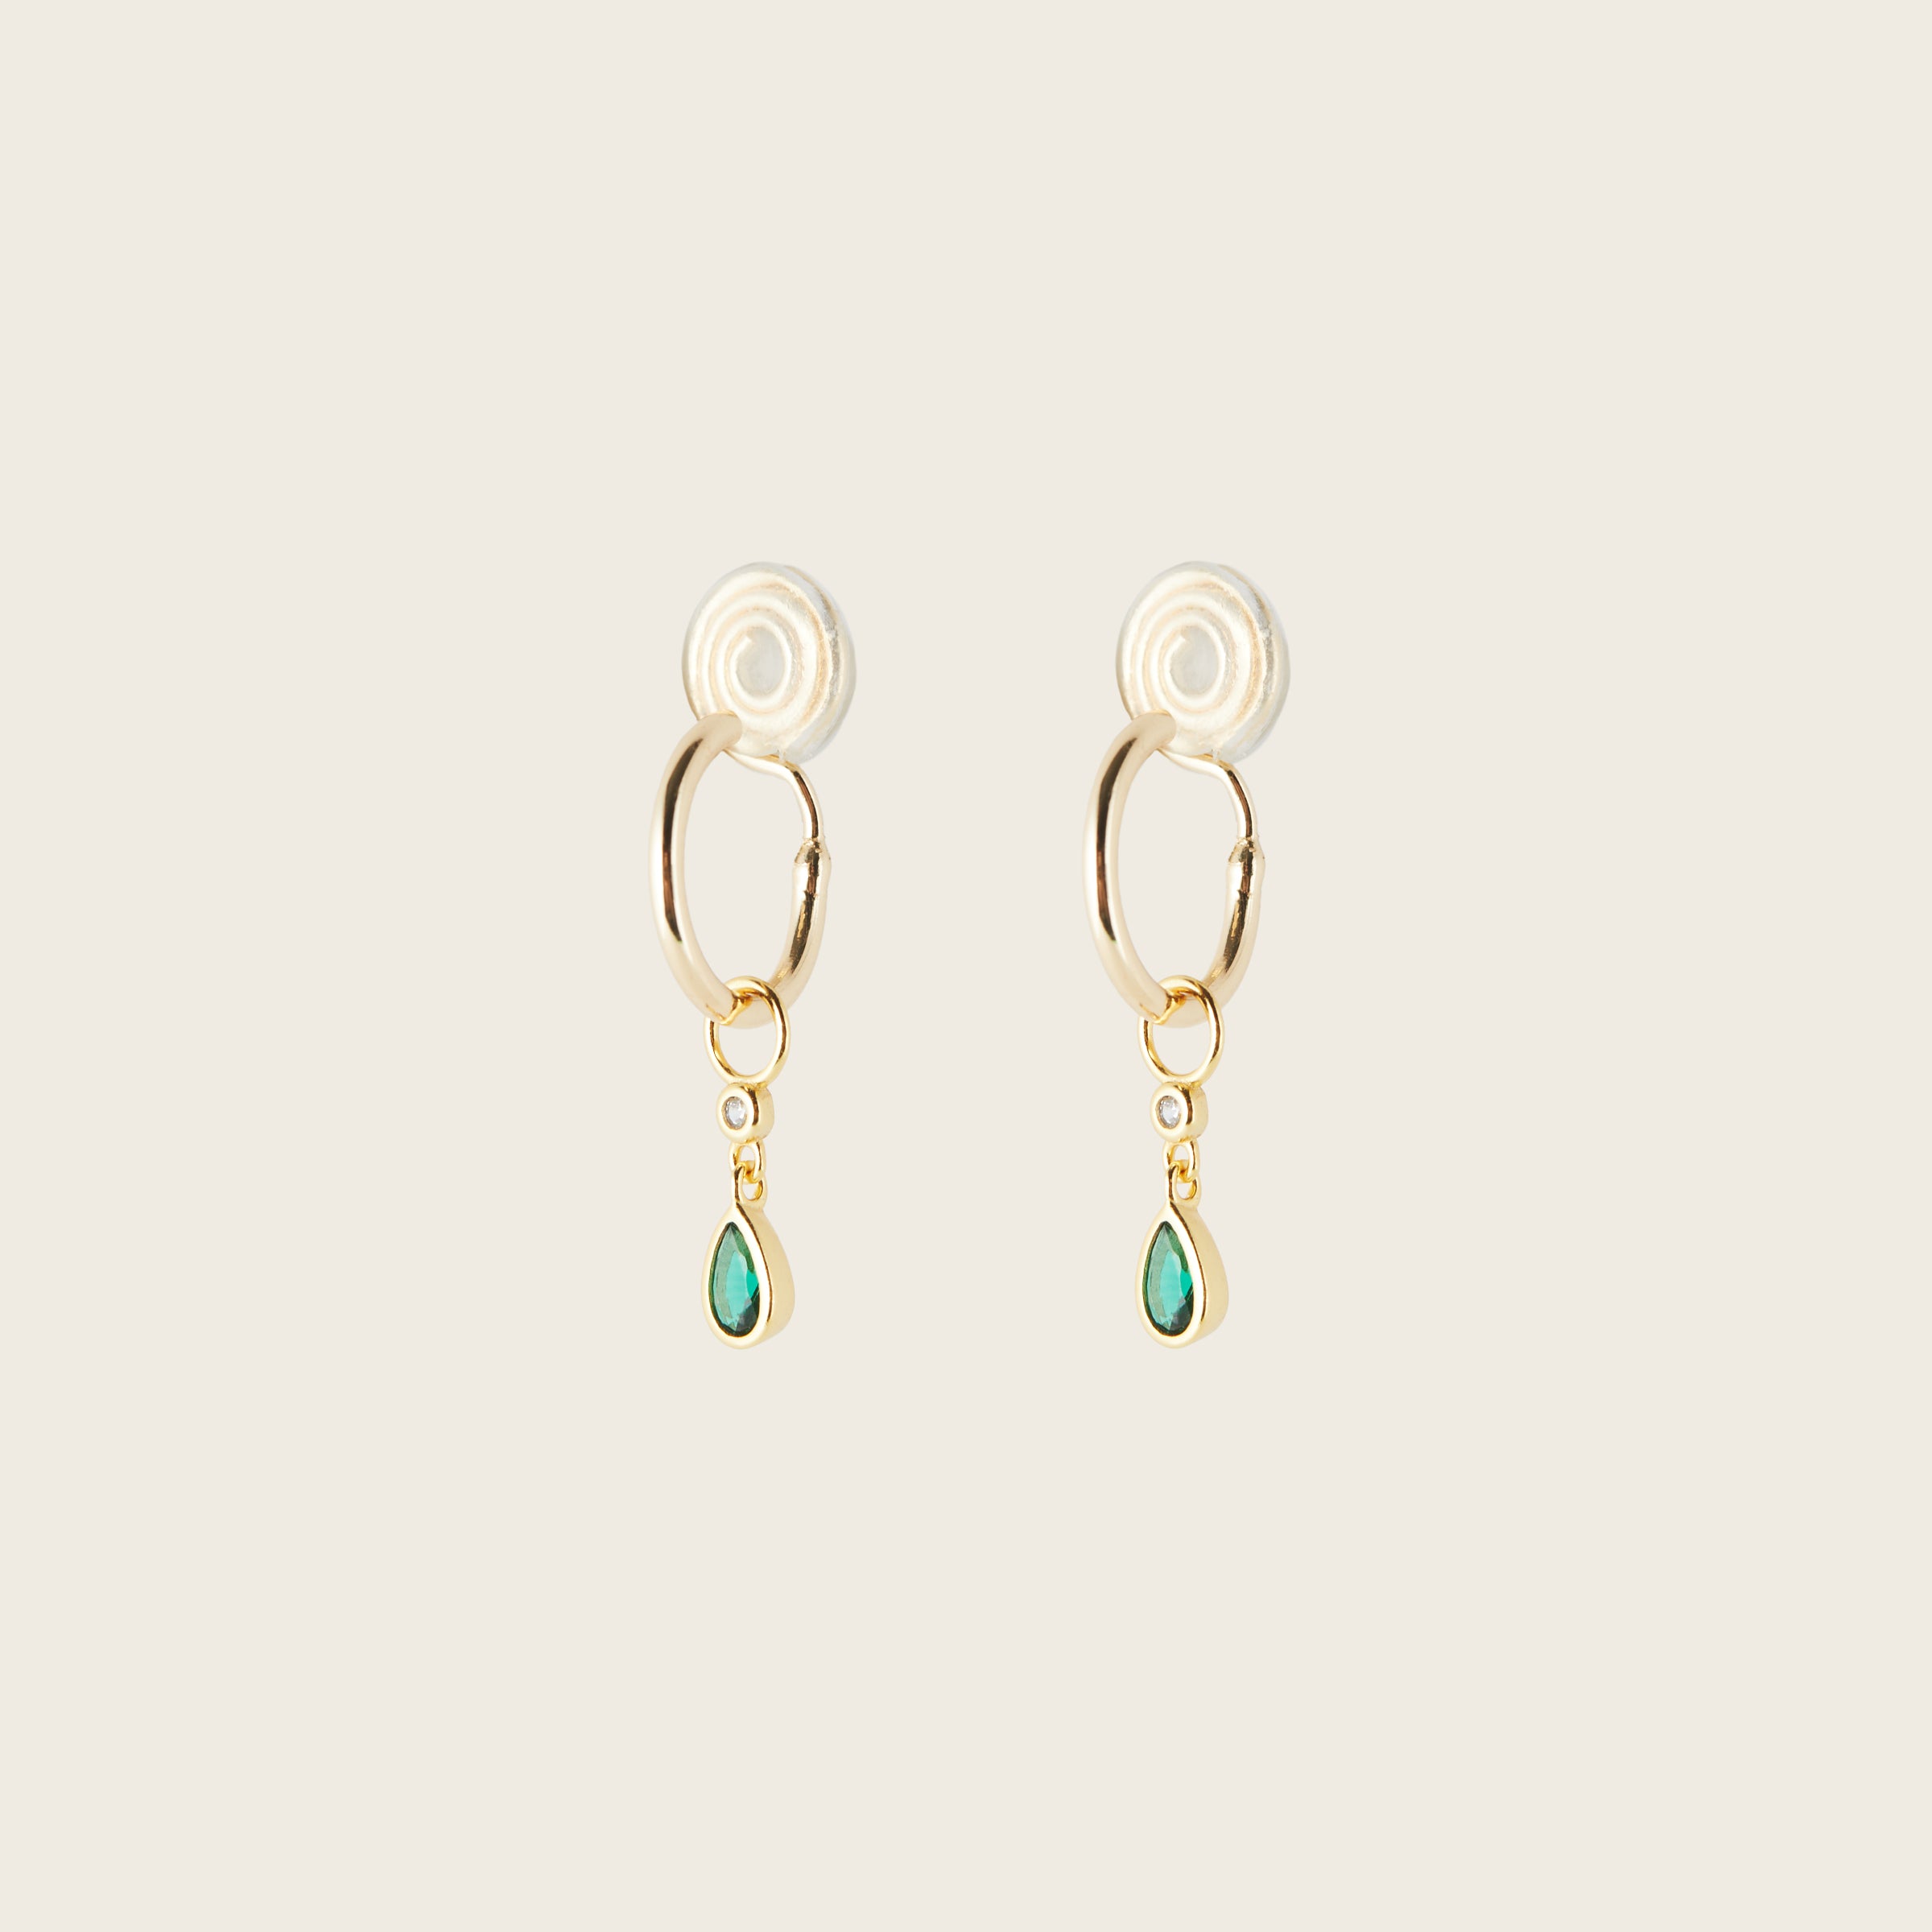 Image of the Emerald Drop Hoop Charms are made with high-quality materials, including 18K gold plating over 925 Sterling Silver. These charms are both non-tarnish and water resistant. The perfect combination of style and durability.